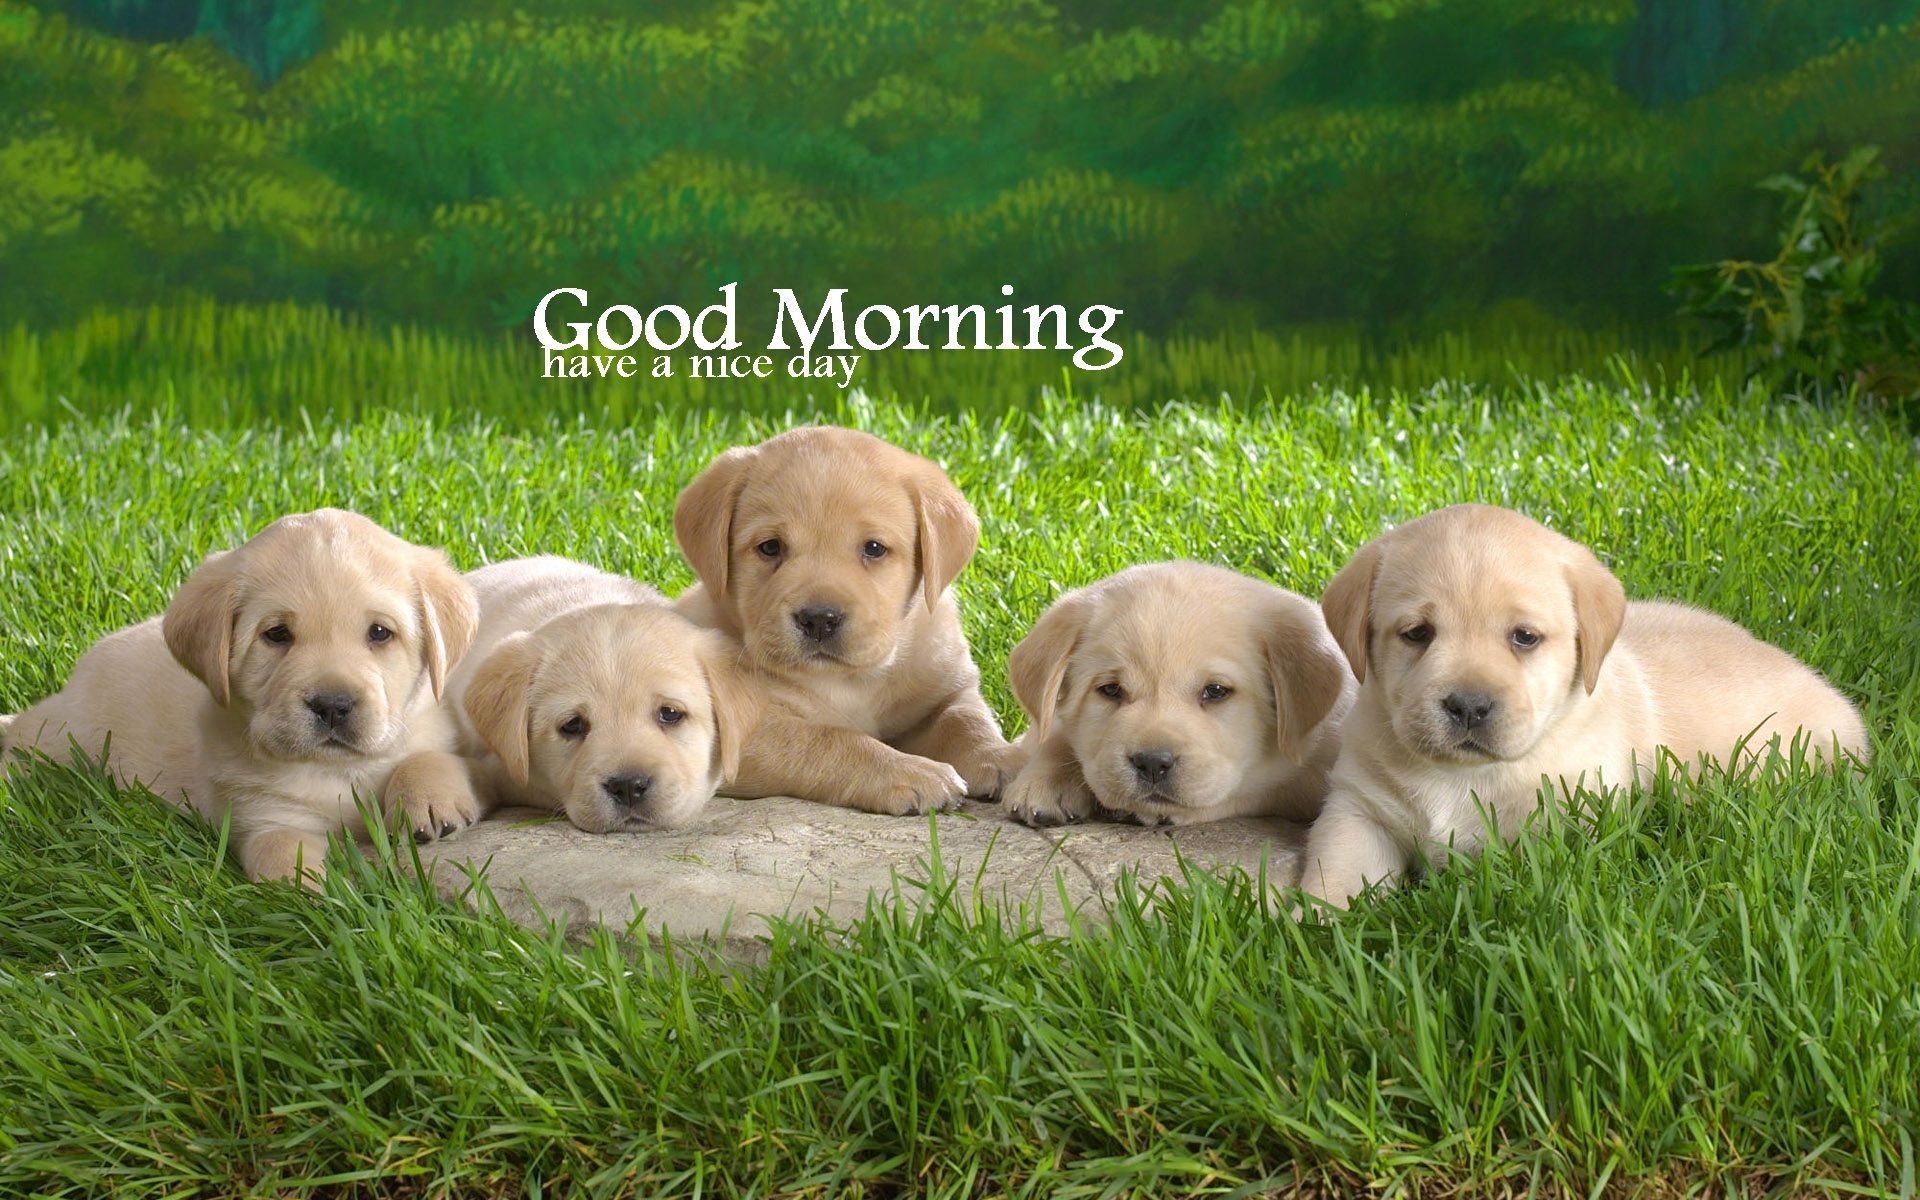 Good Morning Dog Images Wallpapers